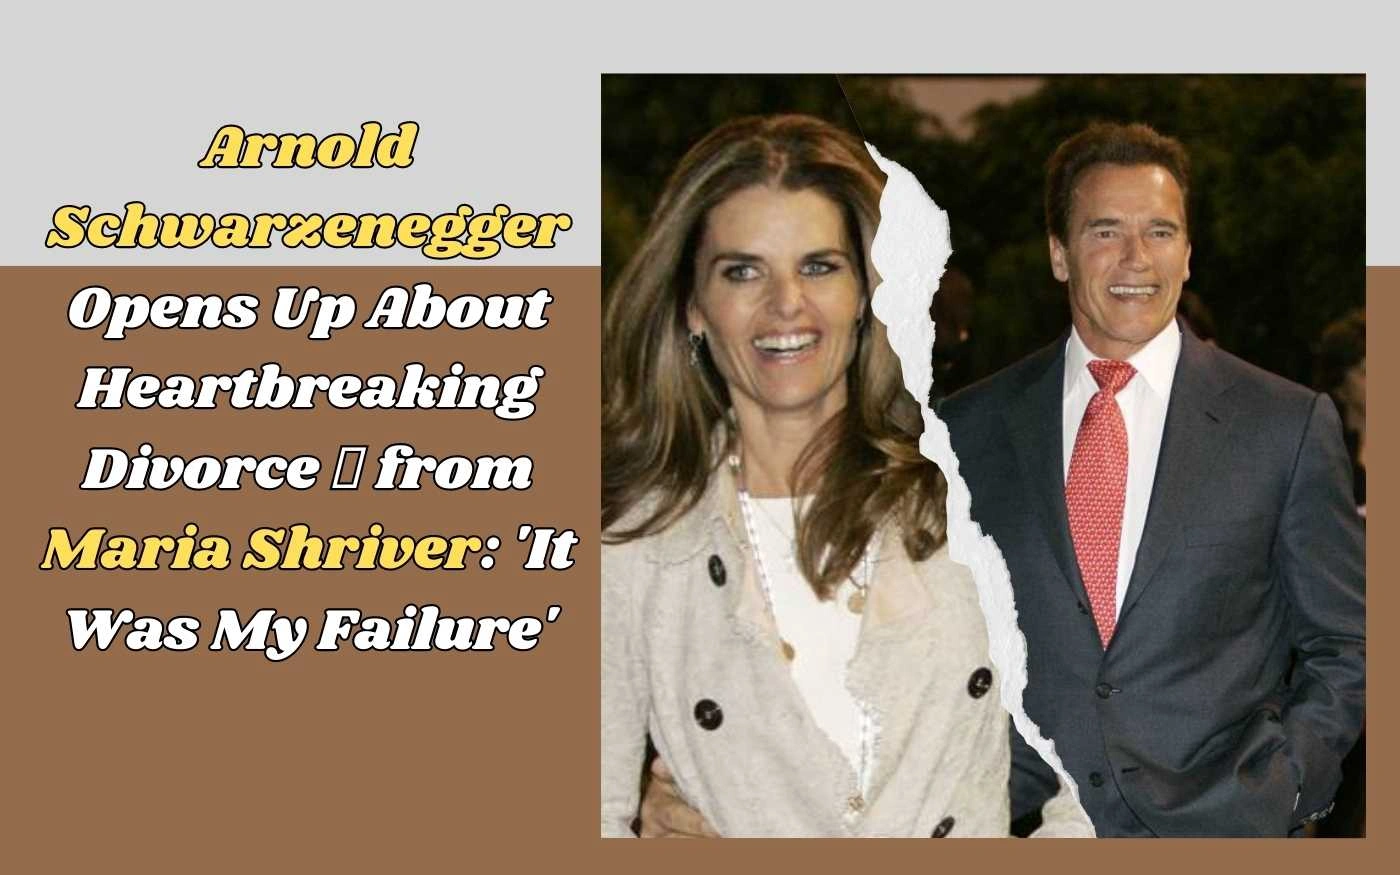 Arnold Schwarzenegger Opens Up About Heartbreaking Divorce from Maria Shriver: 'It Was My Failure'